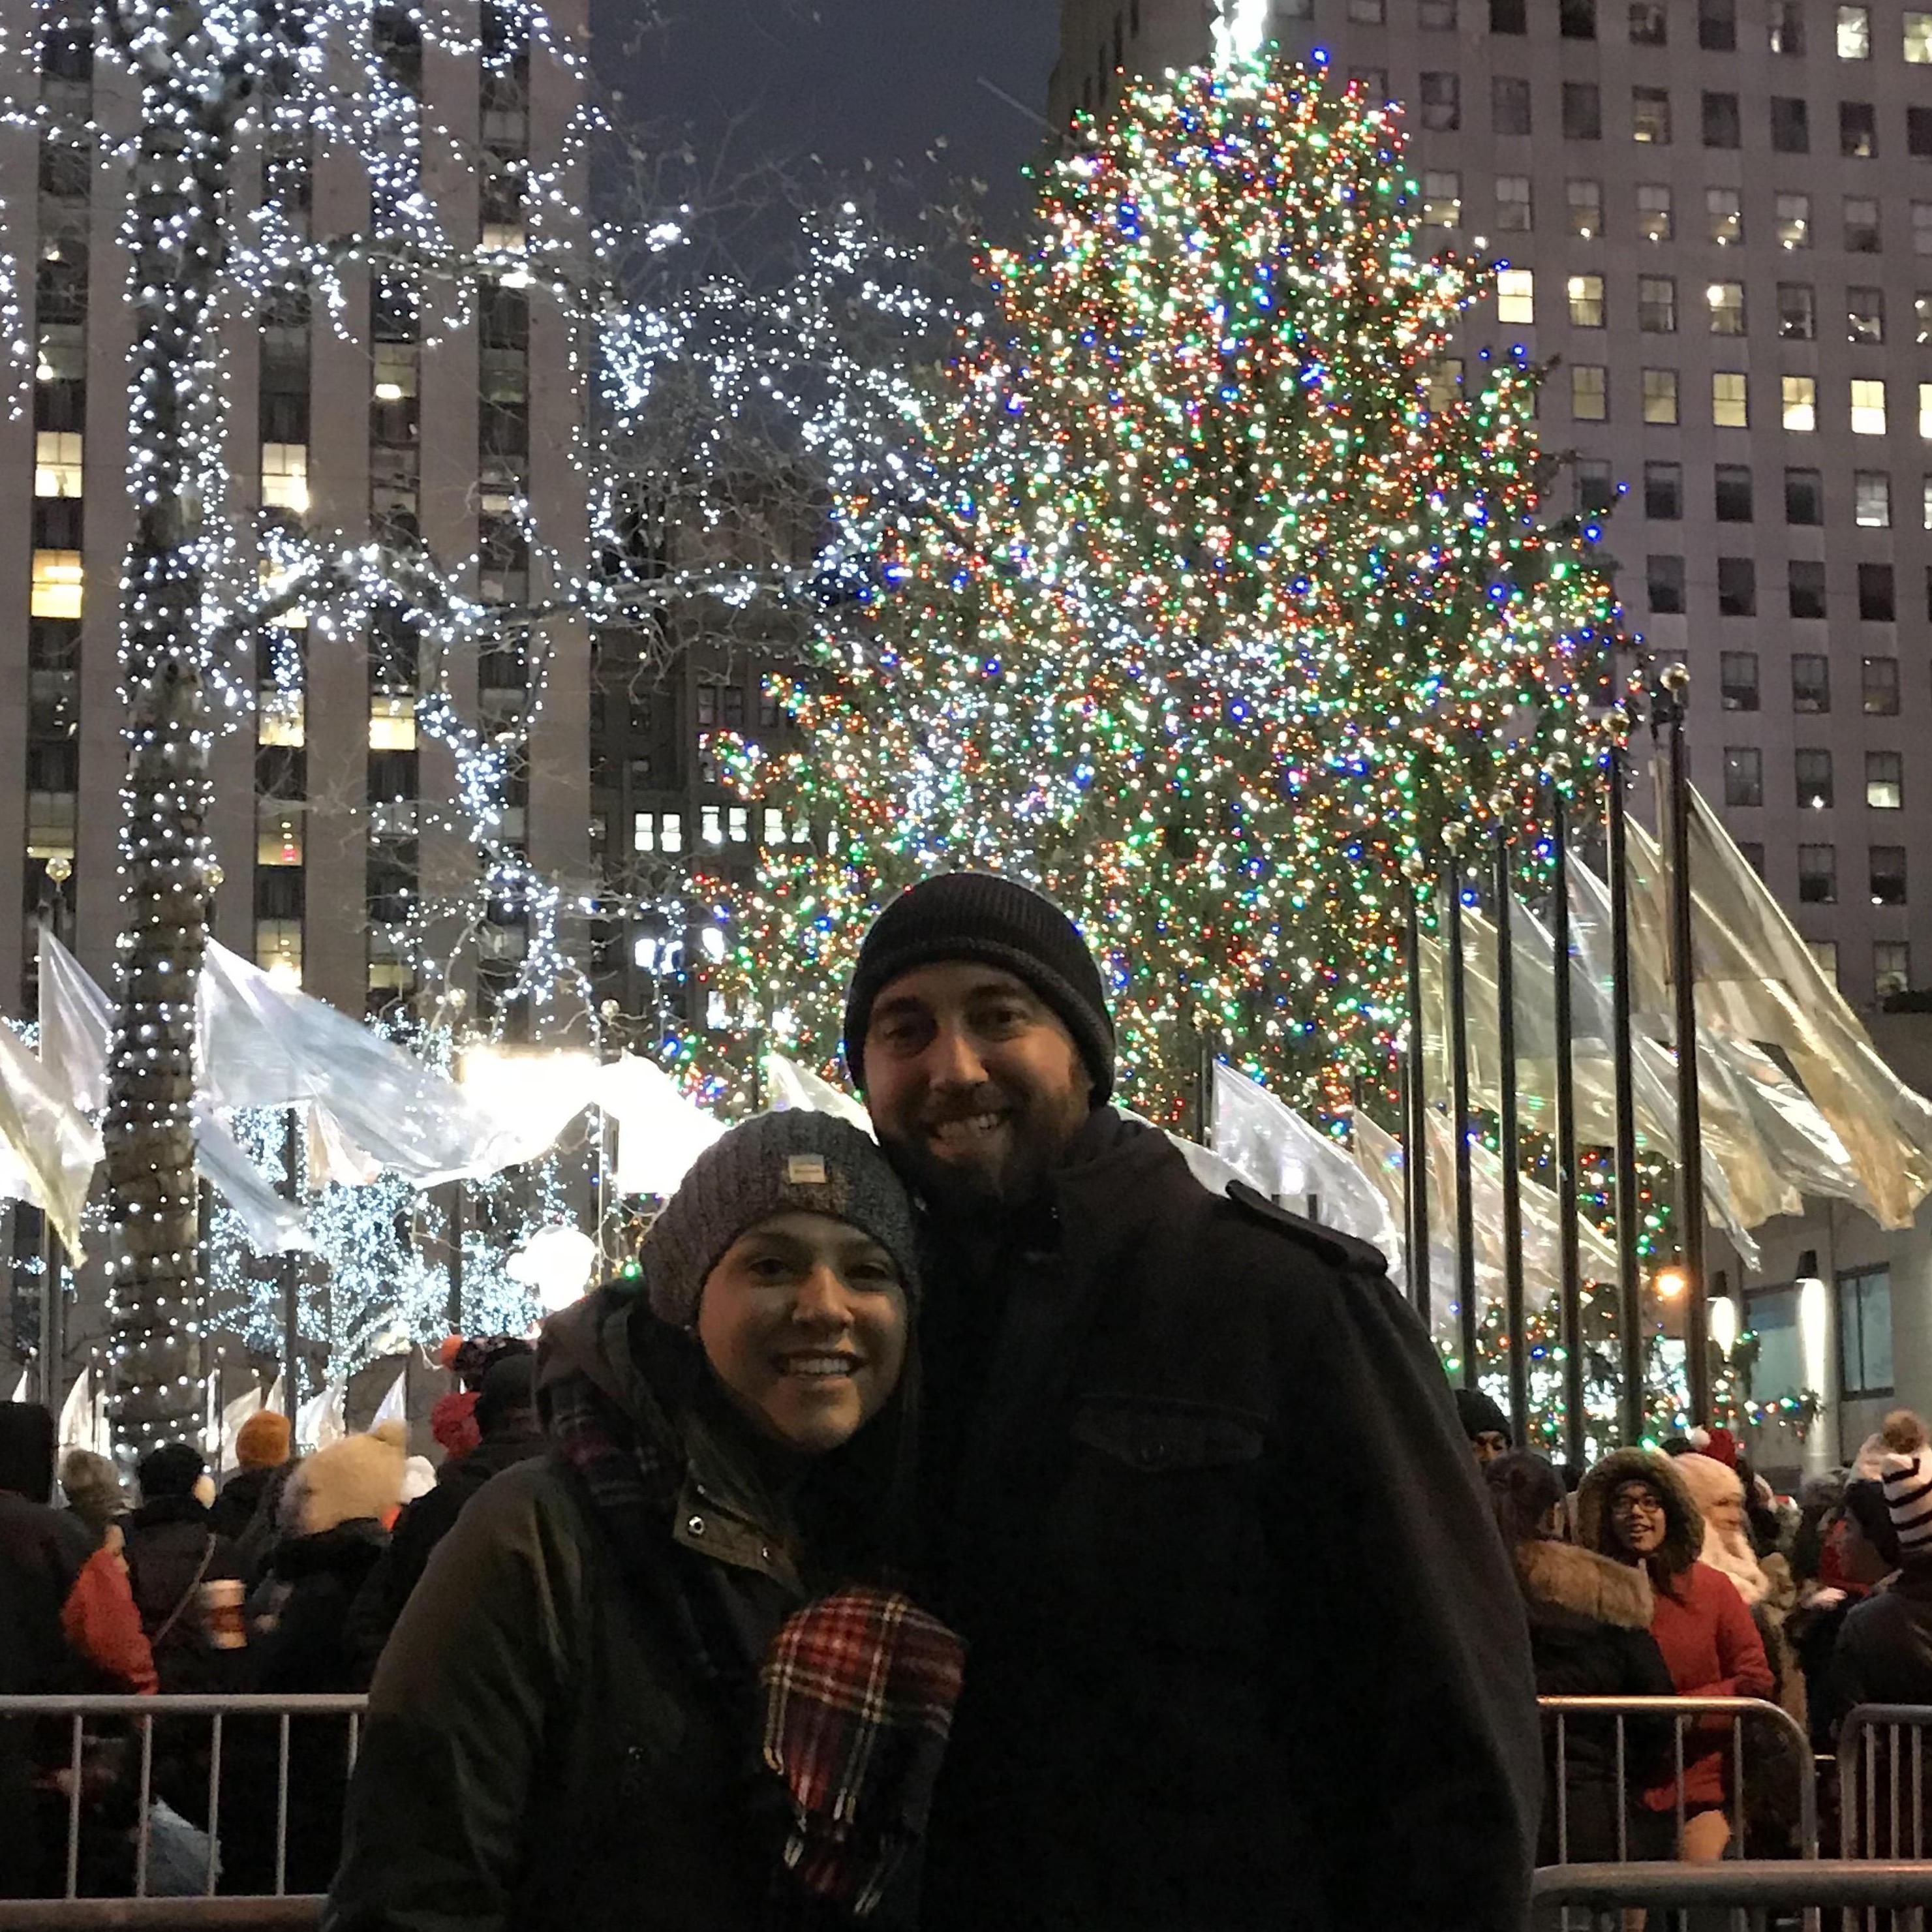 We got to go to NYC during Christmas time back in 2017 to visit Erica's family and friends. Here we are with the Rockefeller Christmas tree.